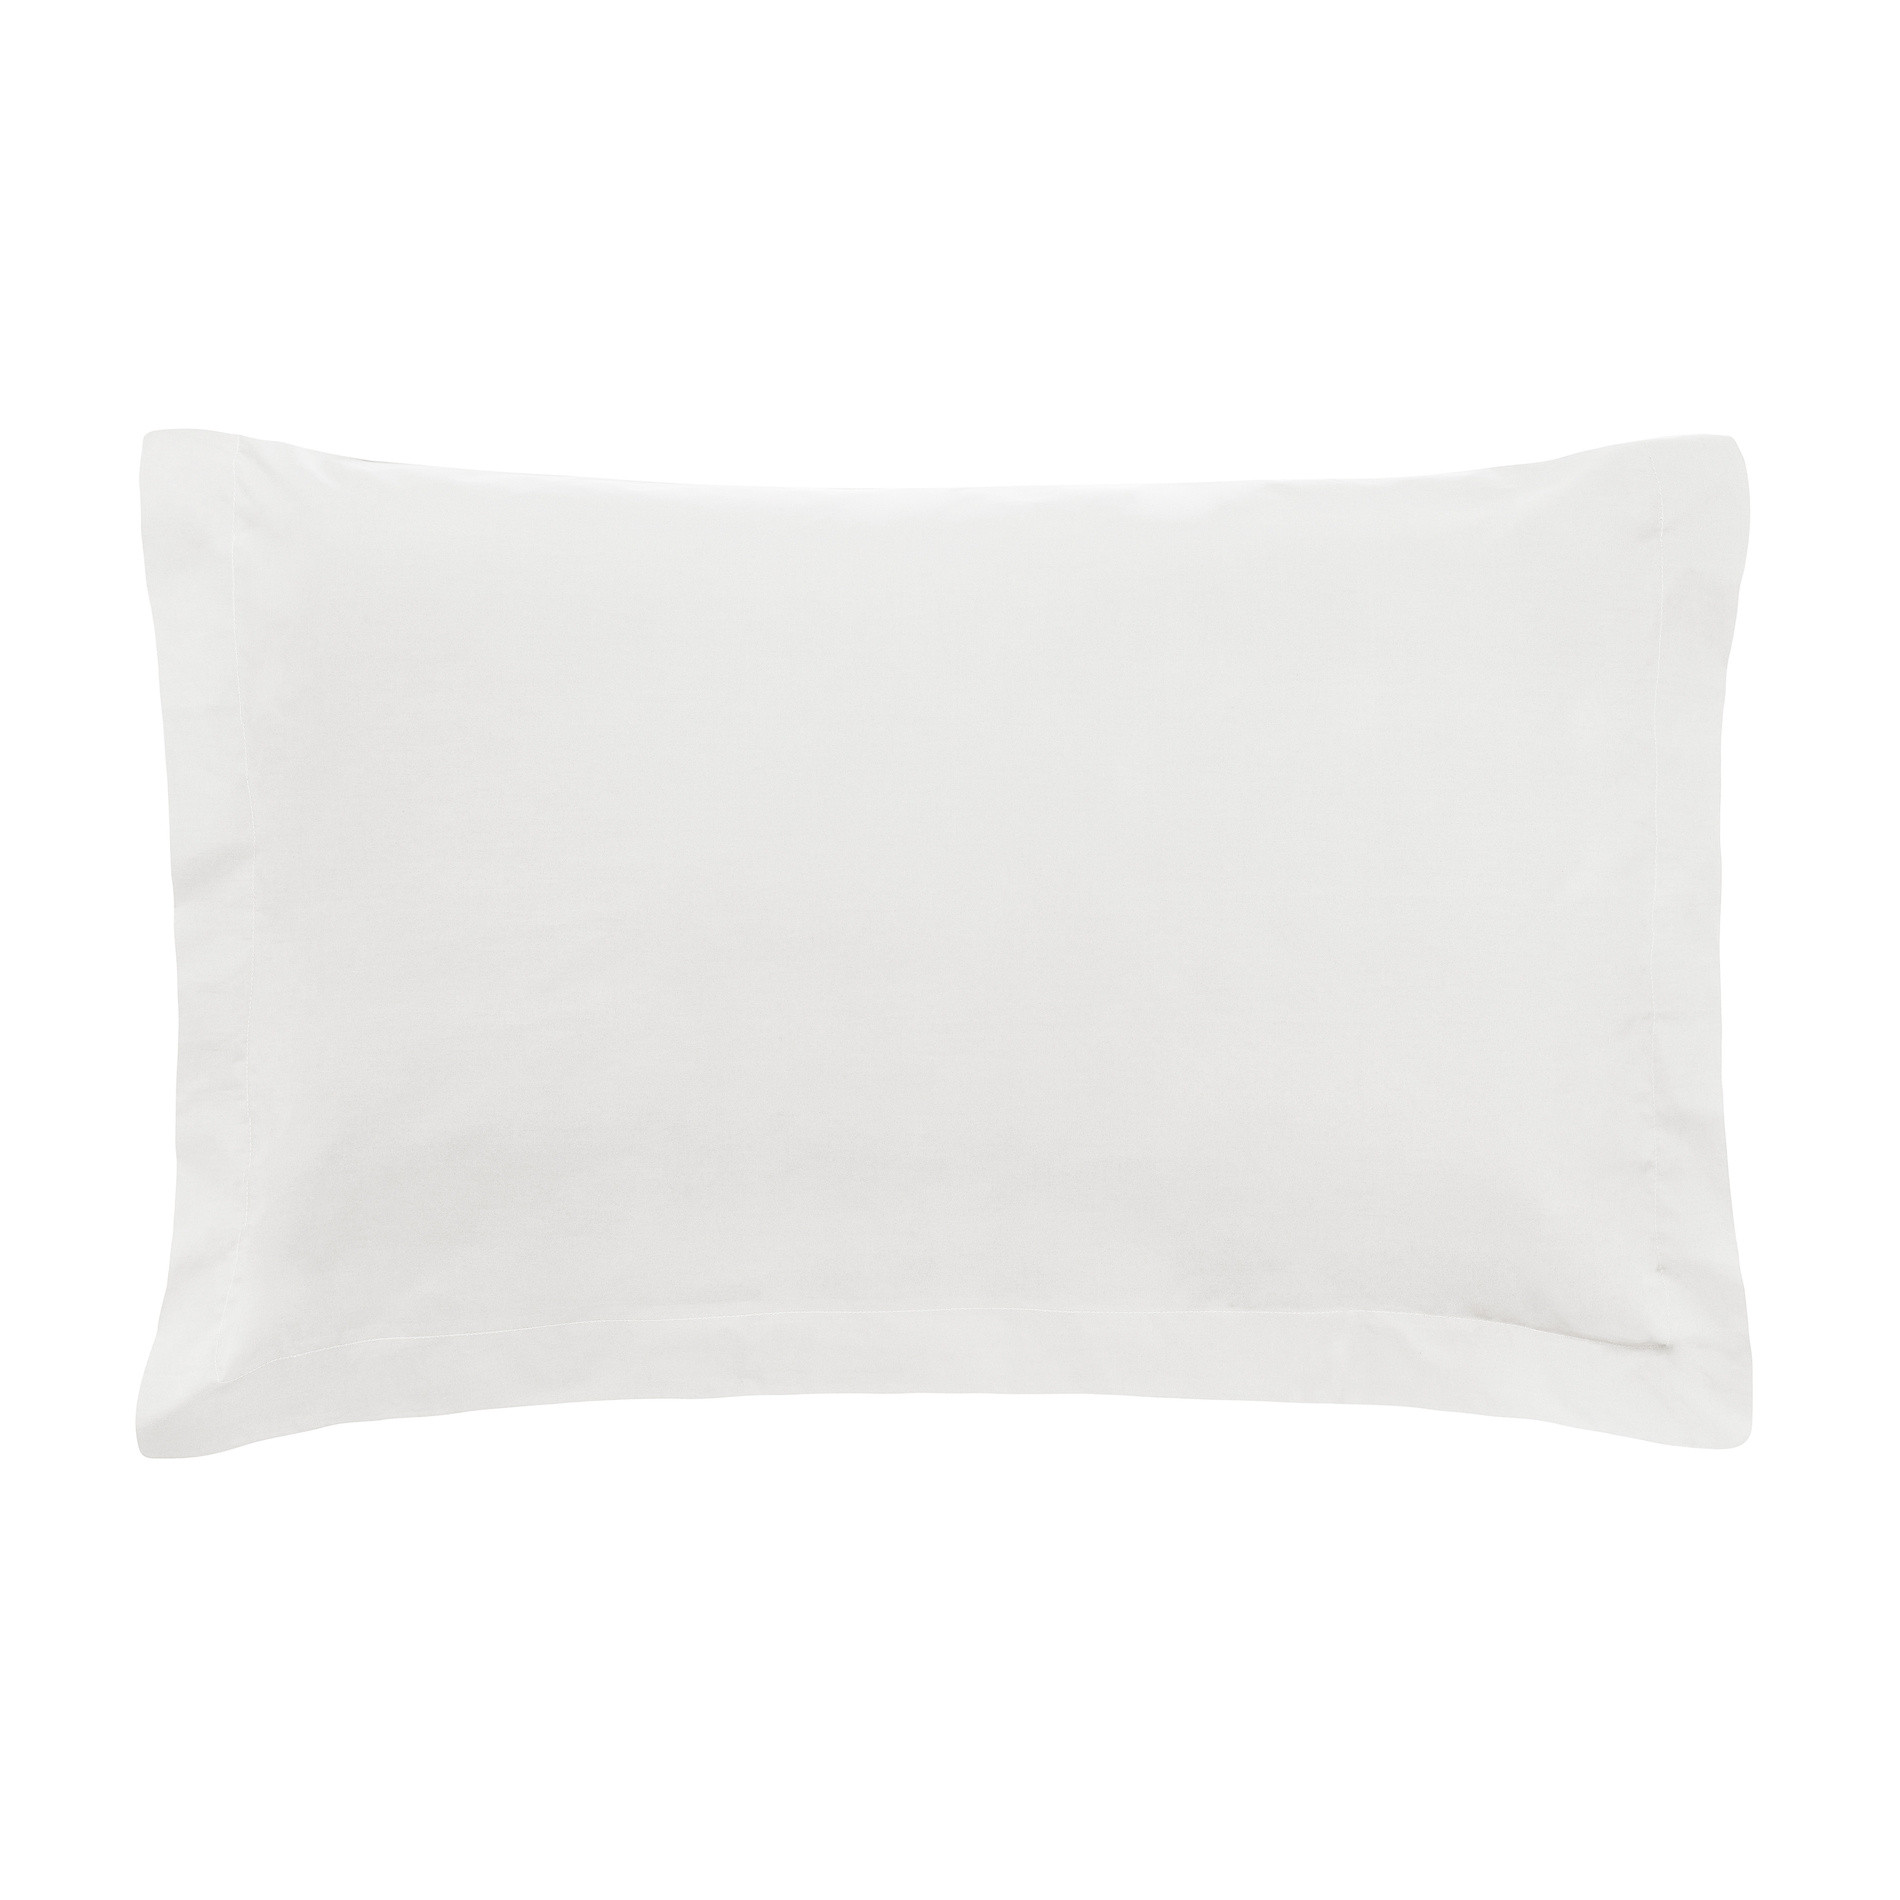 Zefiro solid colour pillowcase in percale., White, large image number 0